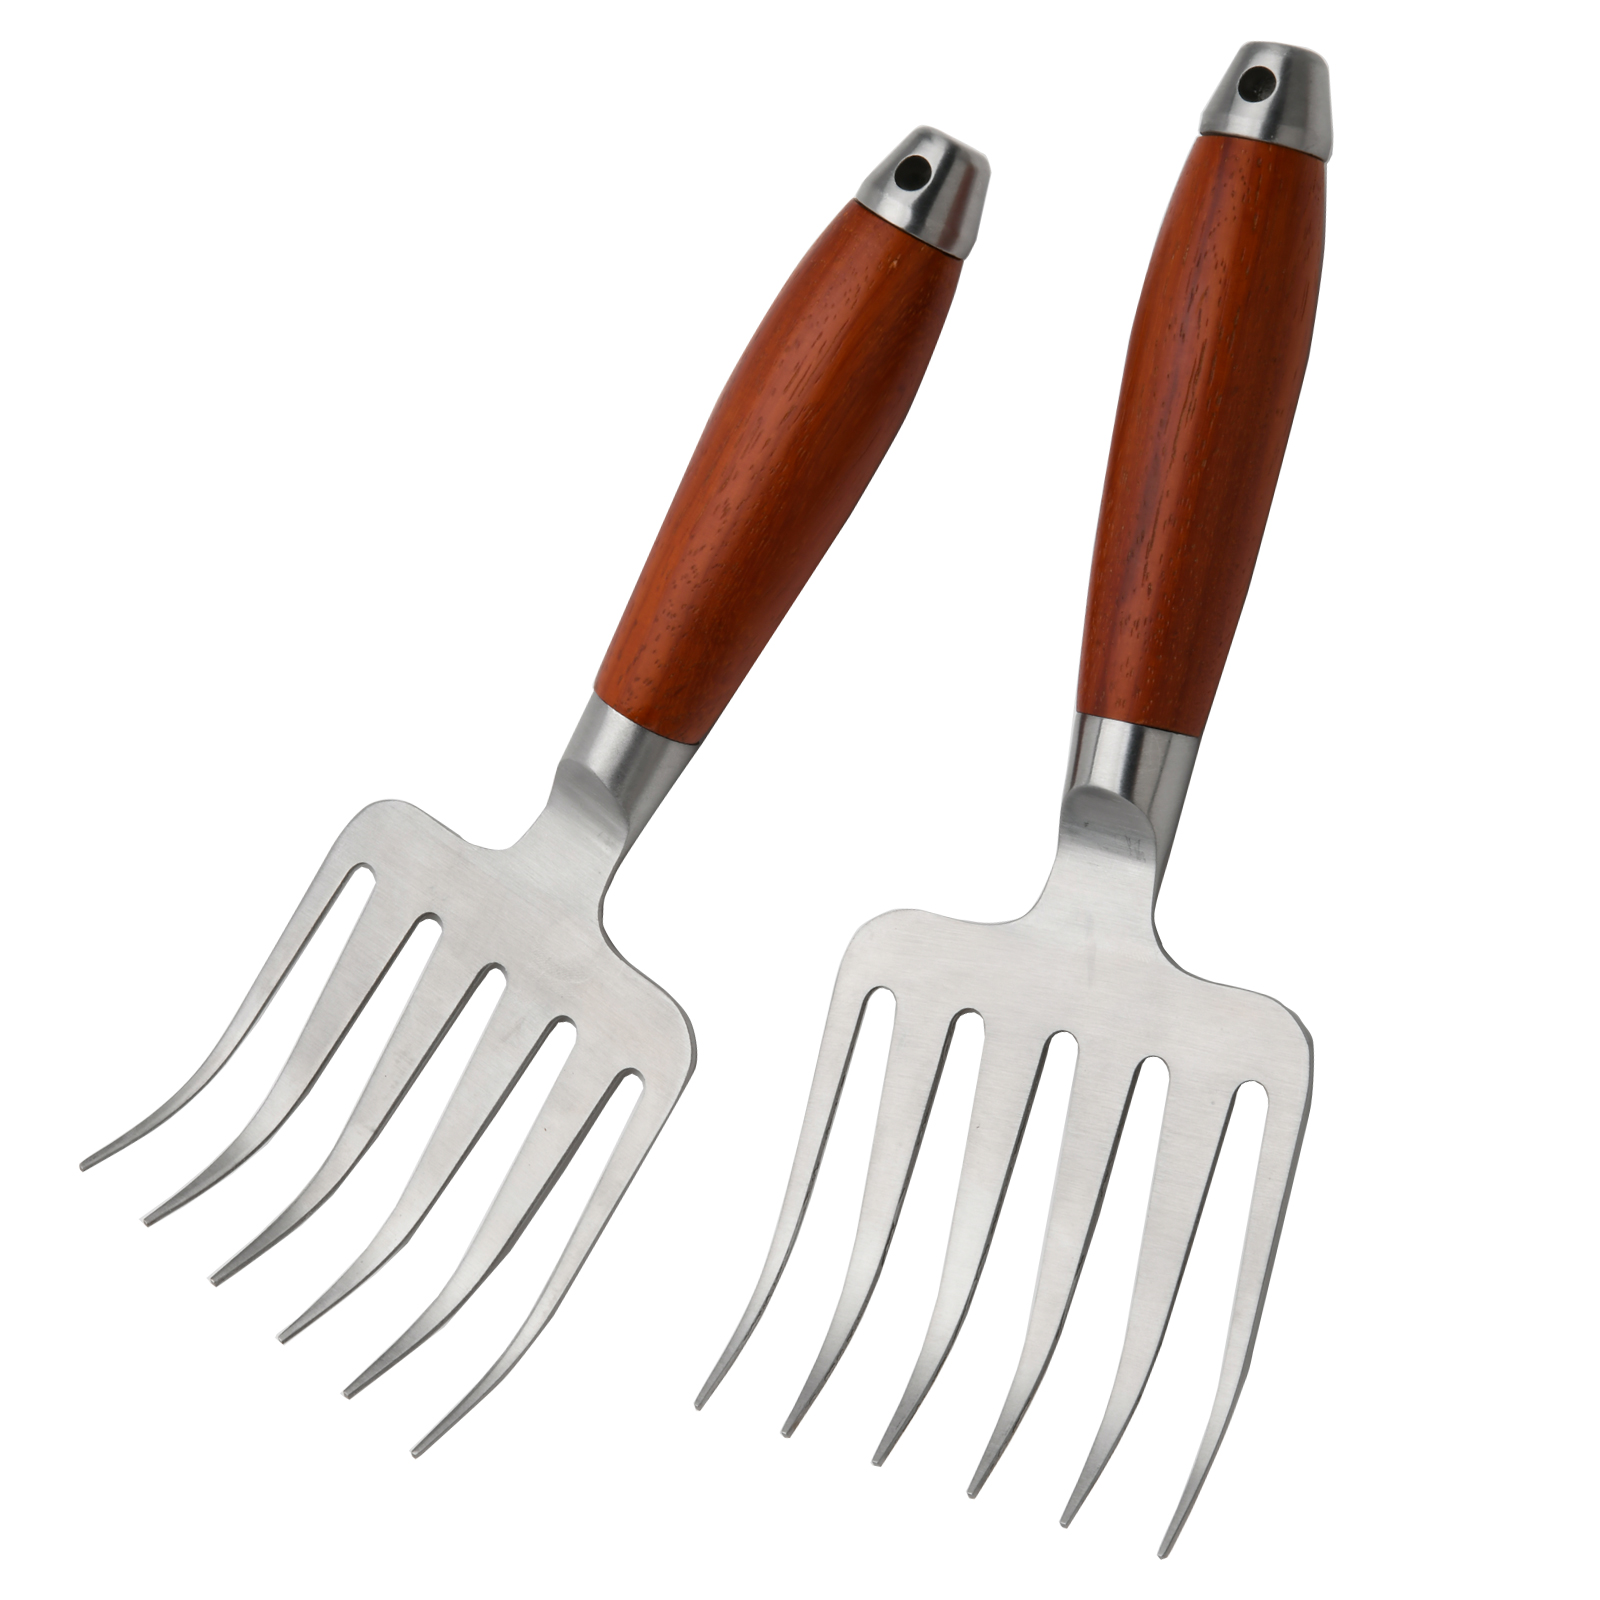 Metal Meat Claws 2 PCS, Barbecue Claws Pork Meat Forks with Wooden